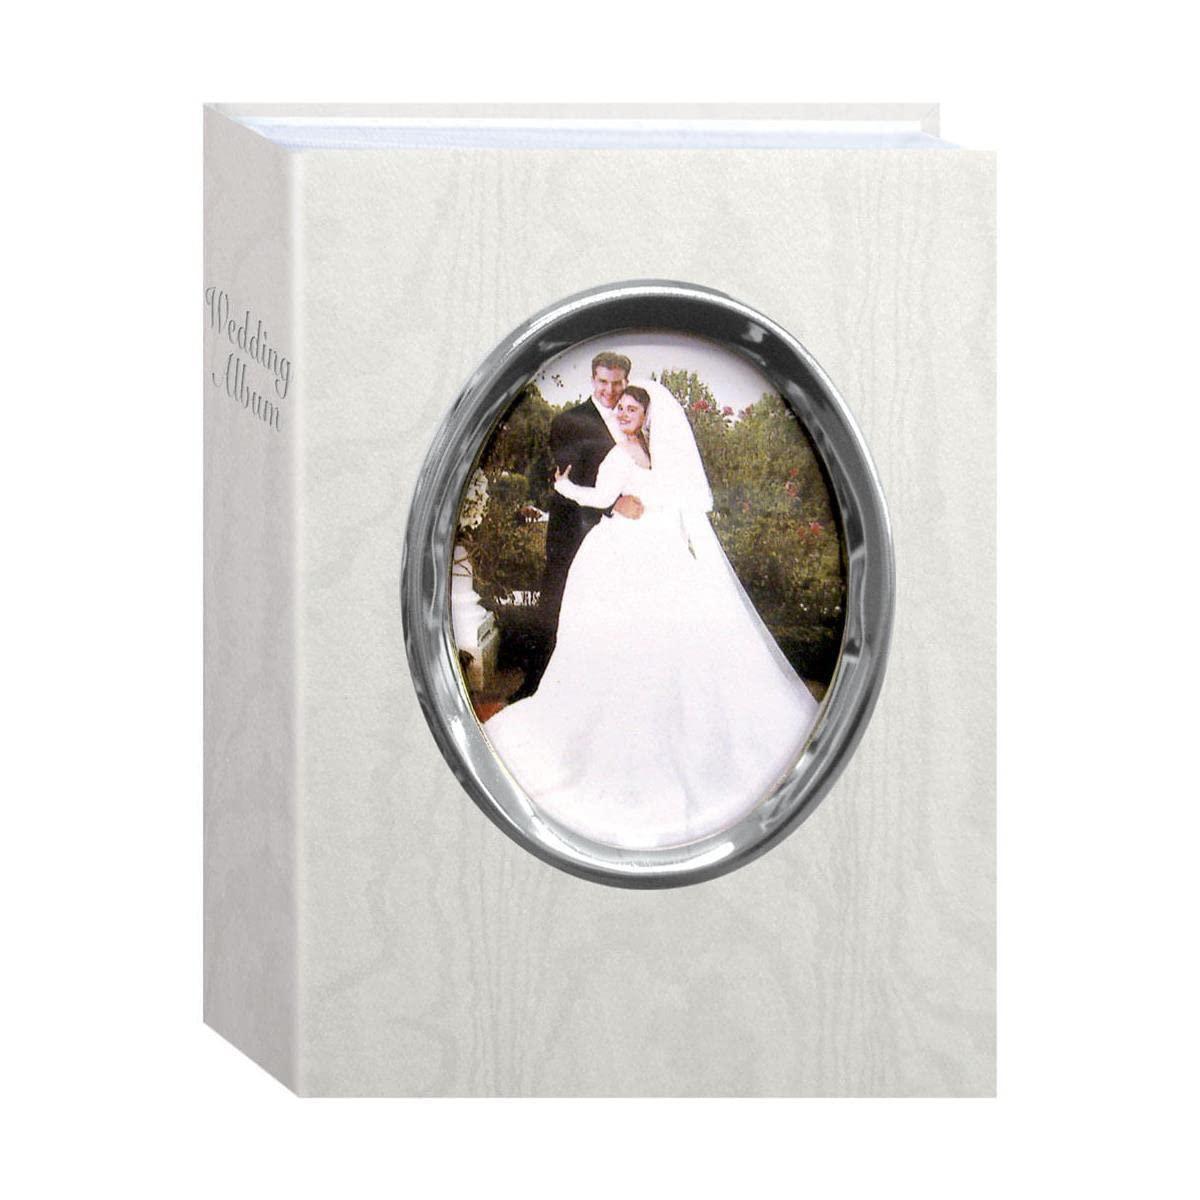 pioneer photo album wfm-46, bound mini wedding photo album with white oval framed cover, 50 pages holds 100 4x6&quot; picture